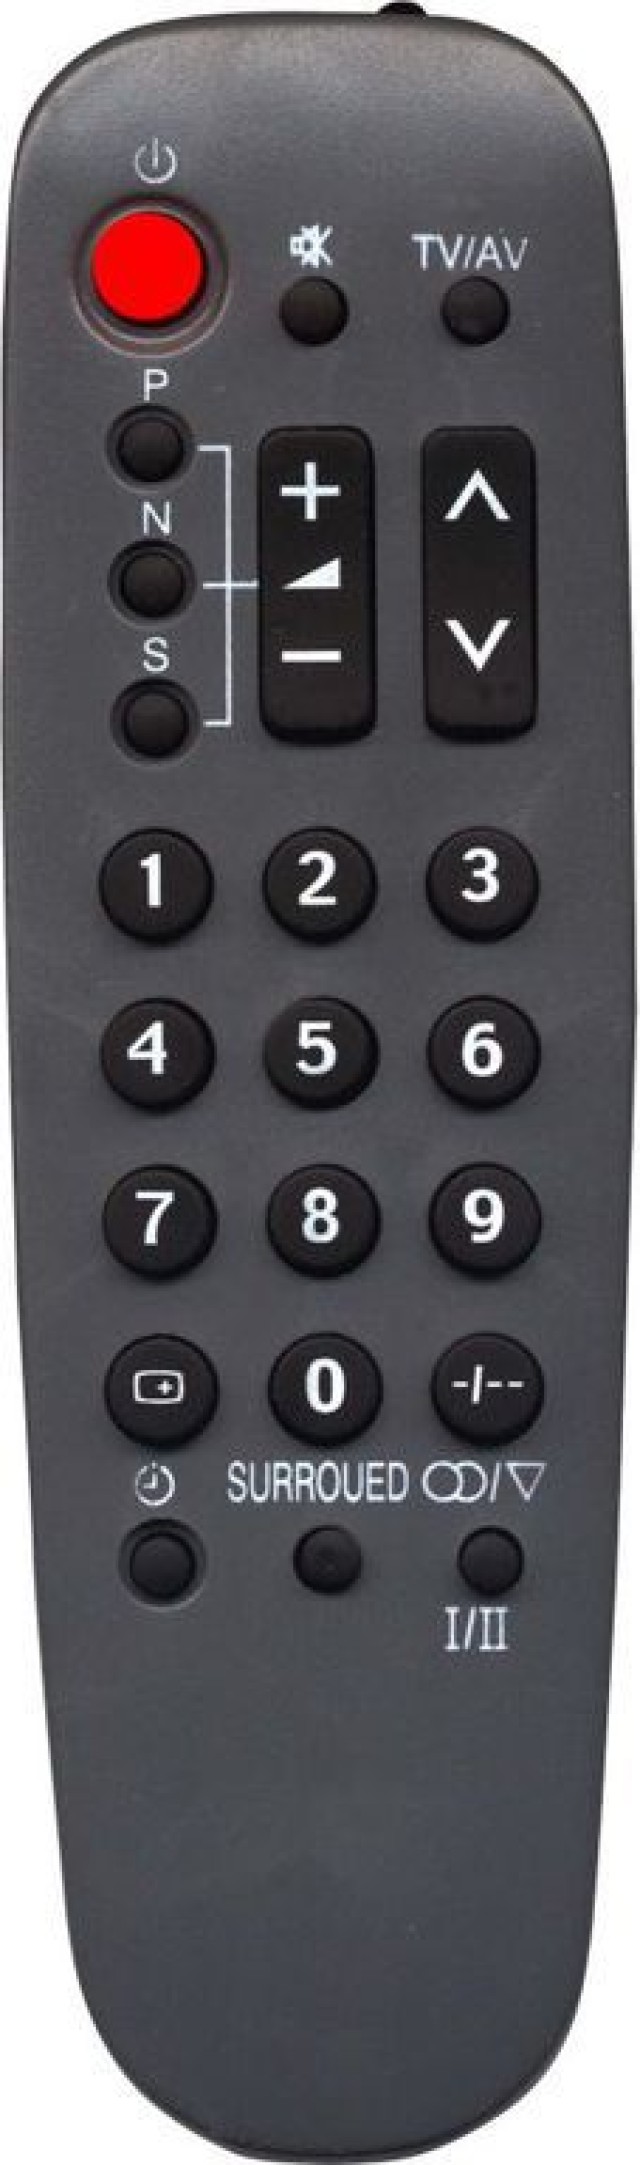 OEM, 0064, Remote control compatible with PANASONIC